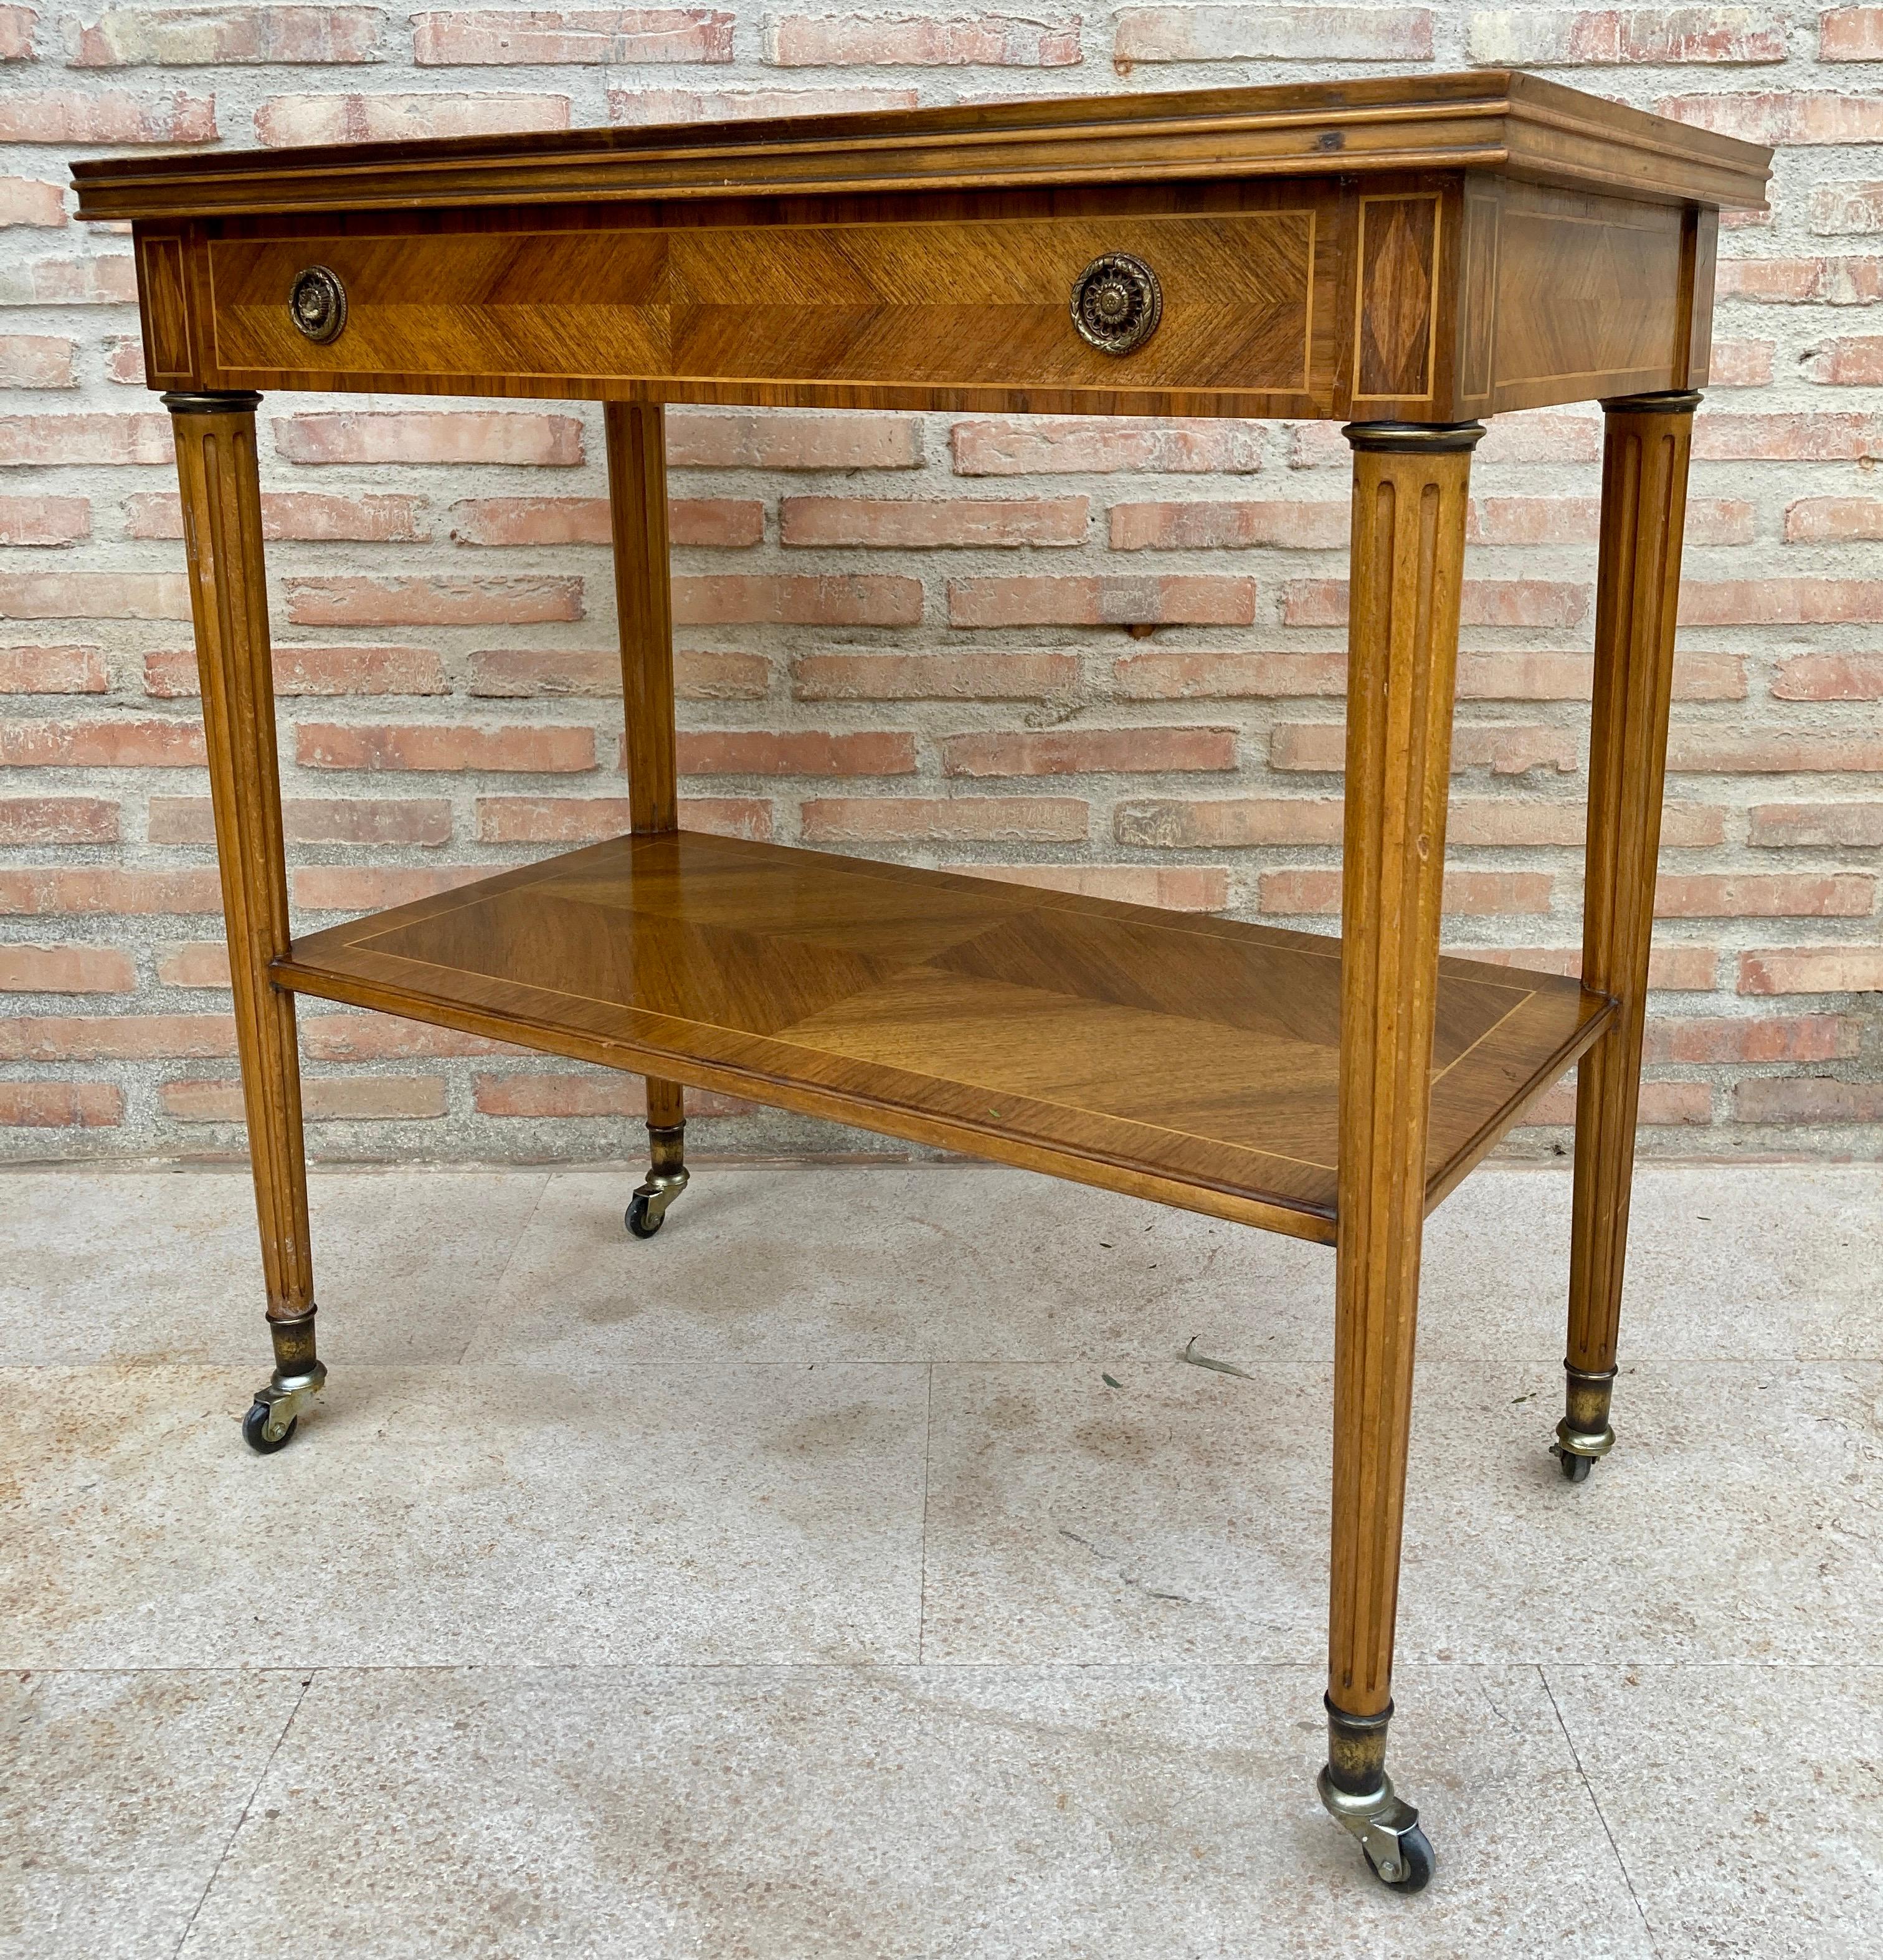 20th Century Neoclassic French Marquetry Side Table With One Drawer And Wheels 1940s For Sale